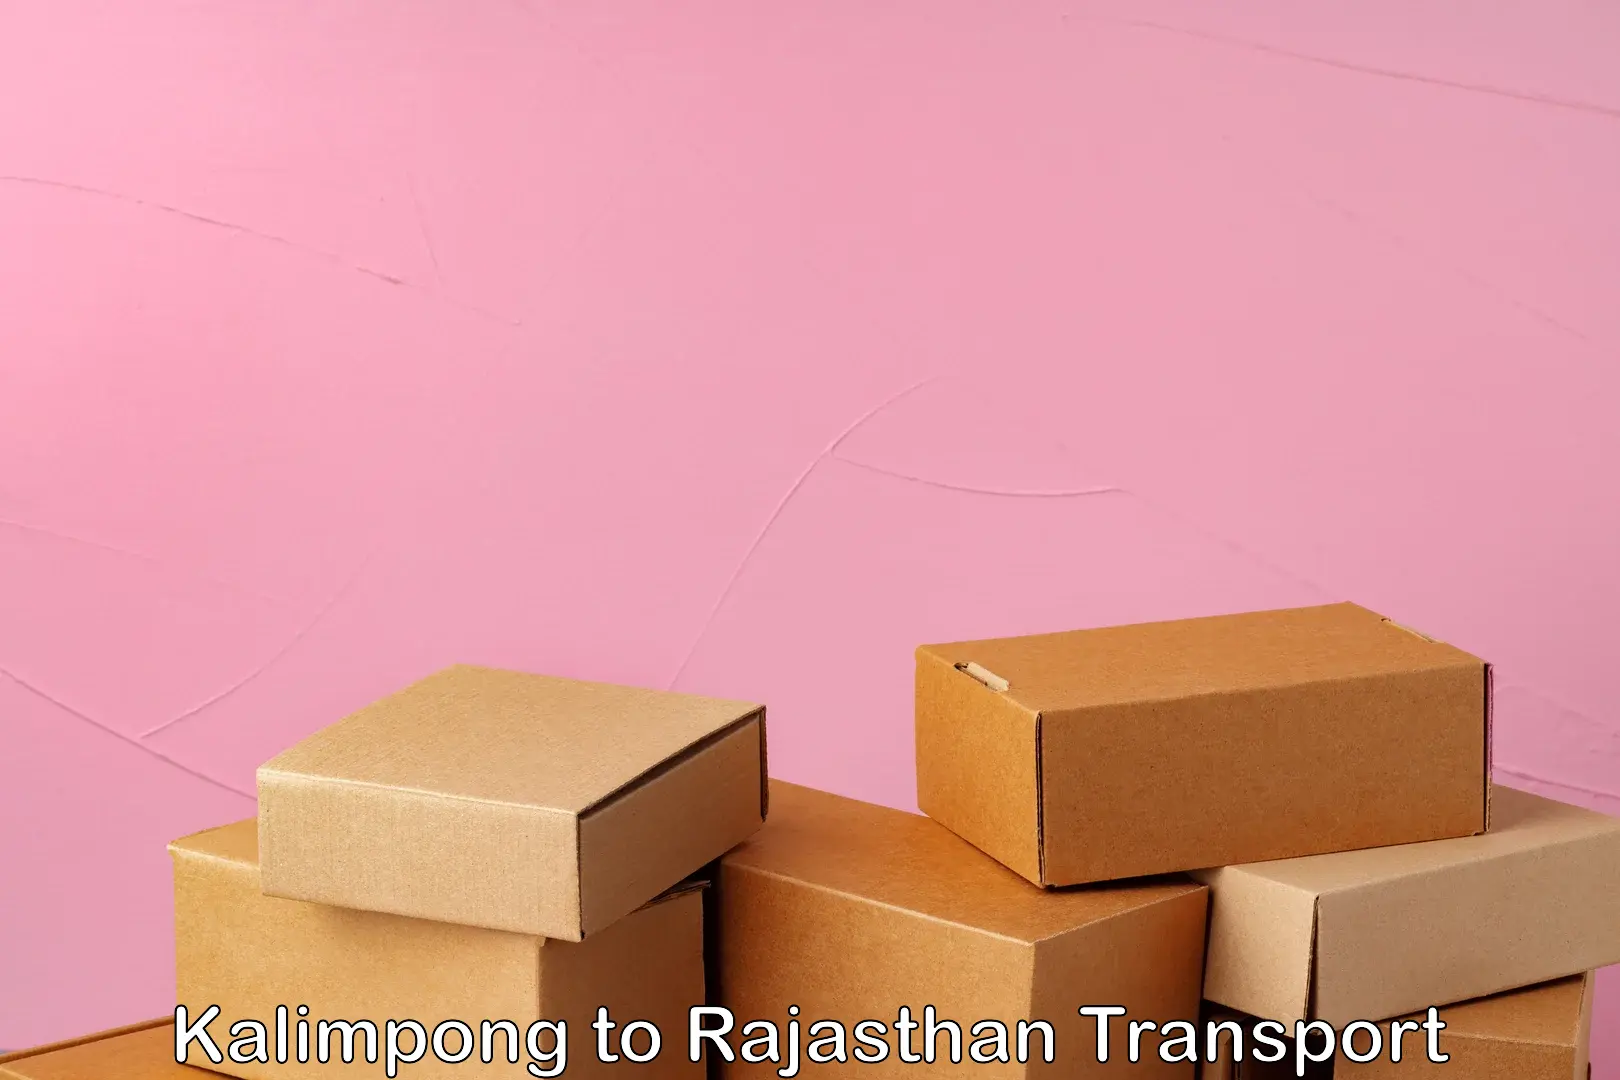 Air freight transport services Kalimpong to Rajasthan